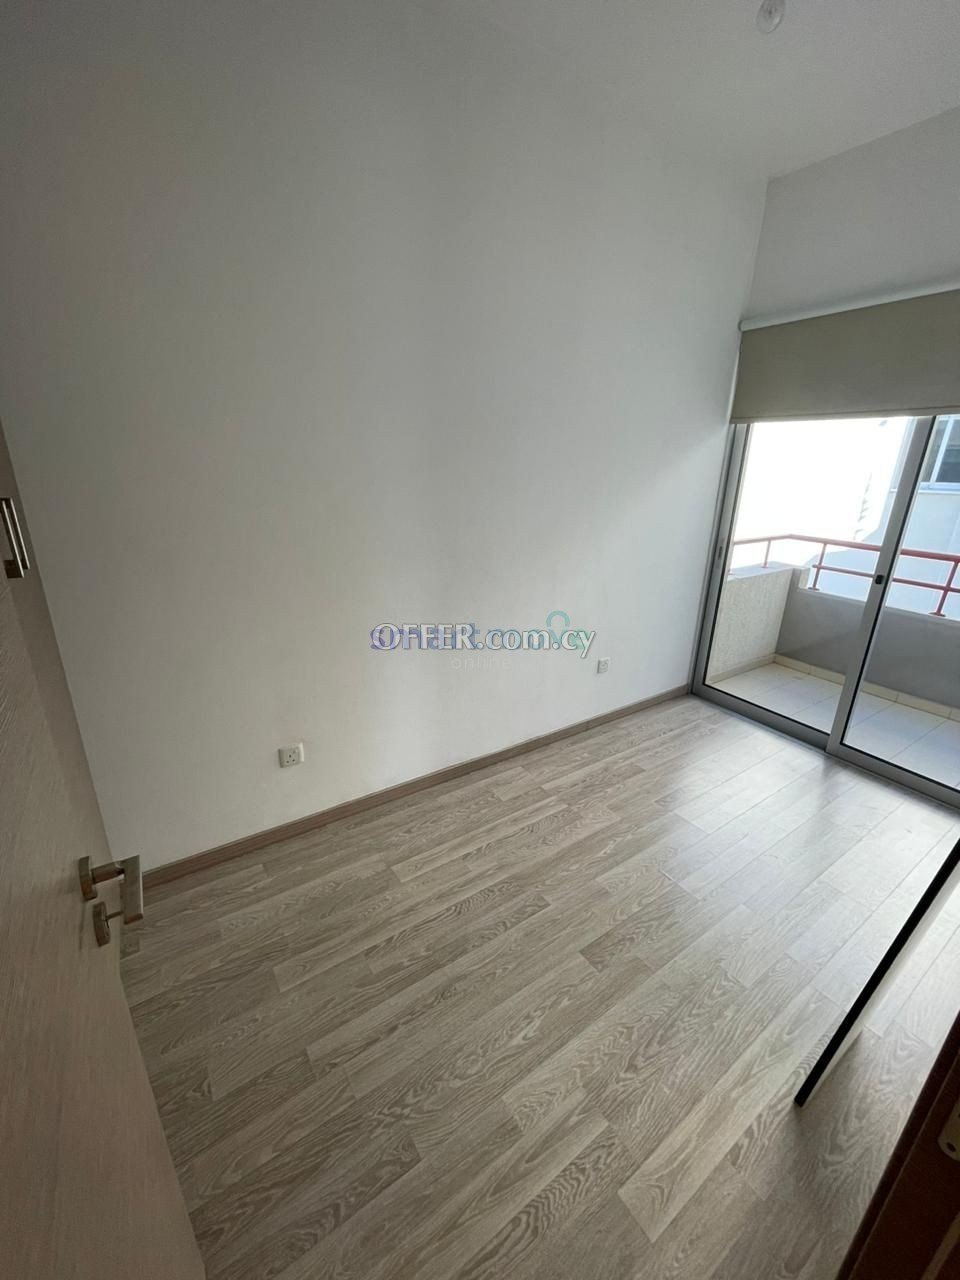 2 + 1 Bedroom Apartment For Rent Limassol - 2